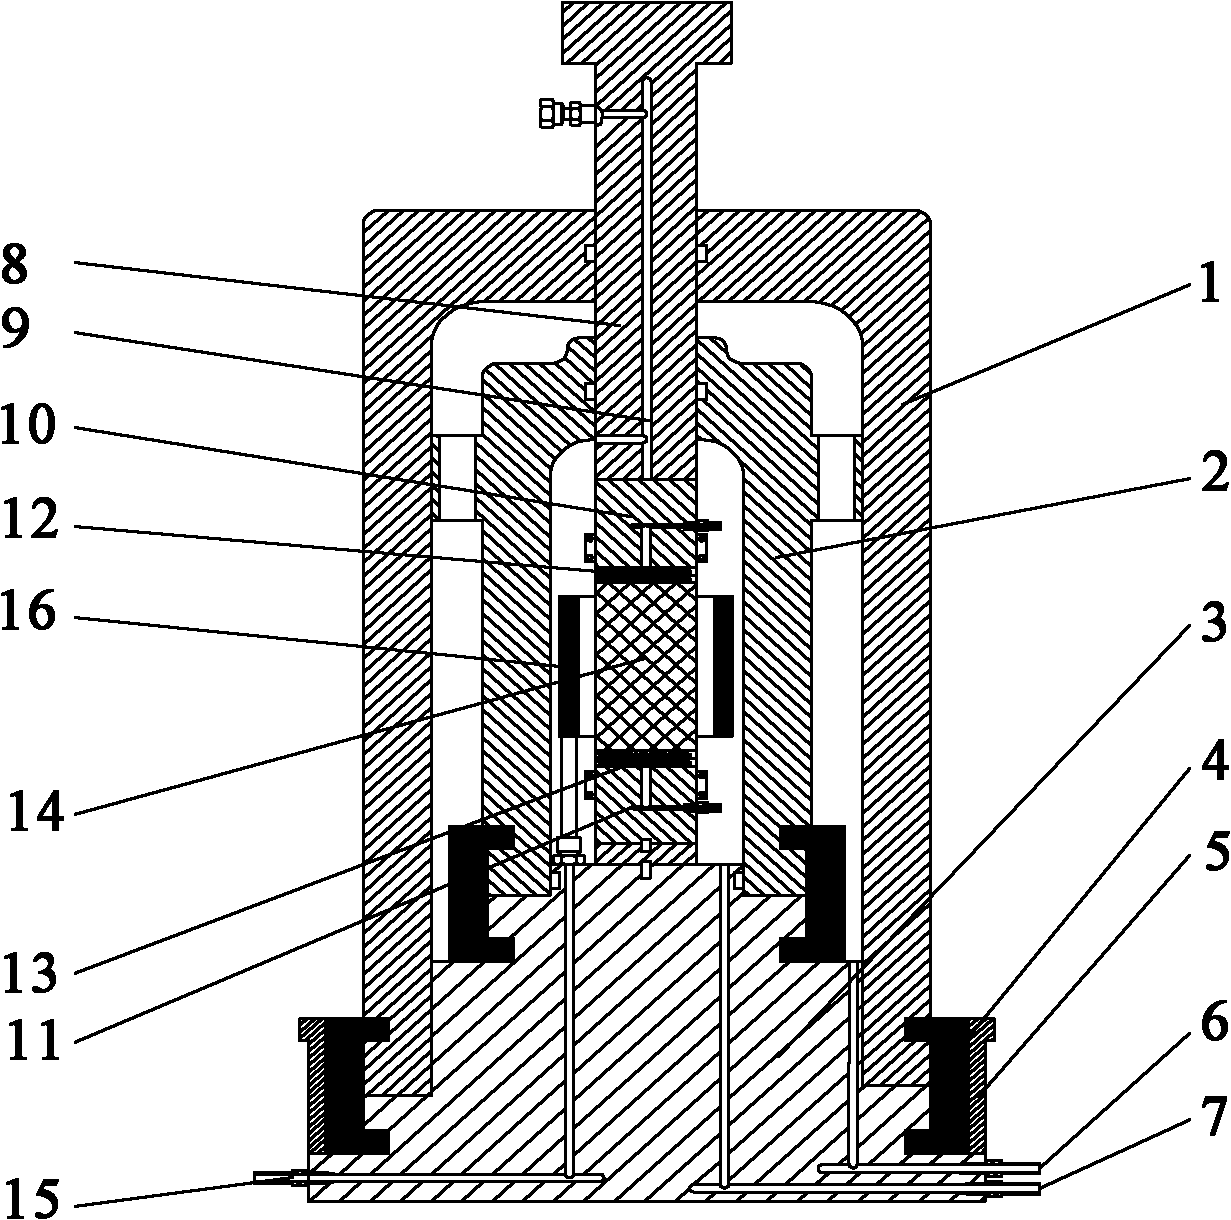 Triaxial test device for testing transubstantiation of sediments of gas hydrate